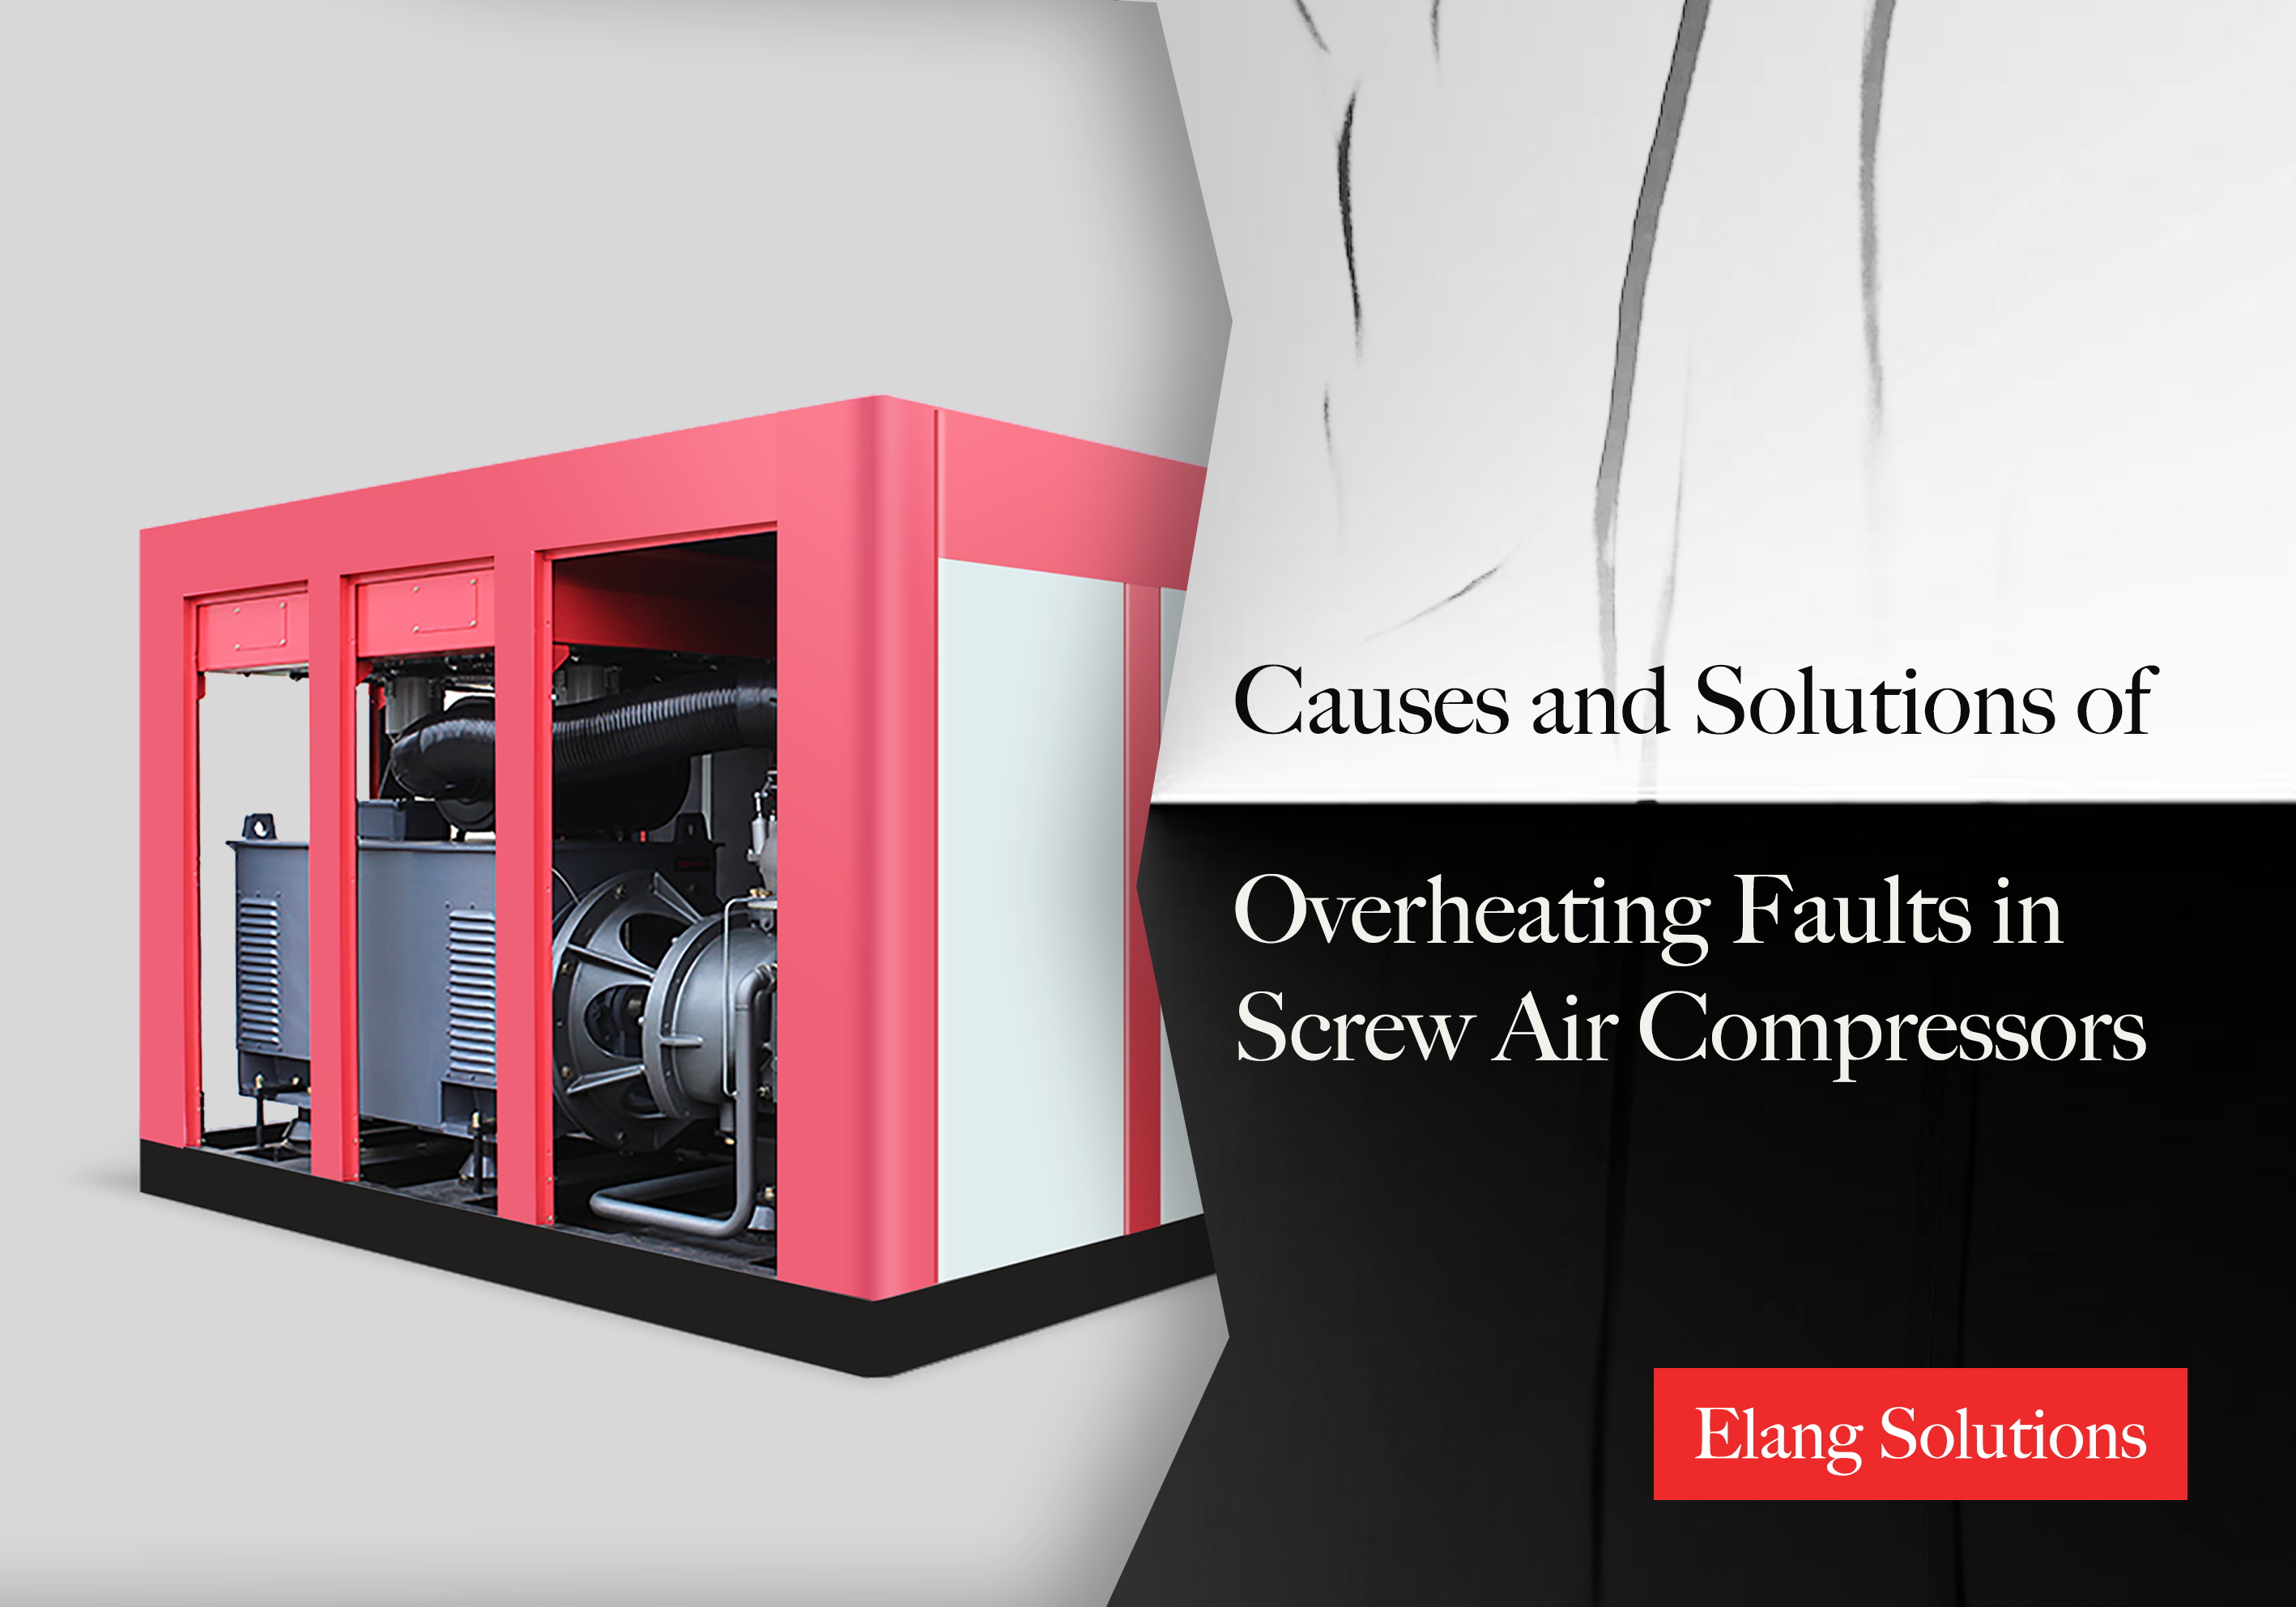 Causes and Solutions of Overheating Faults in Screw Air Compressors